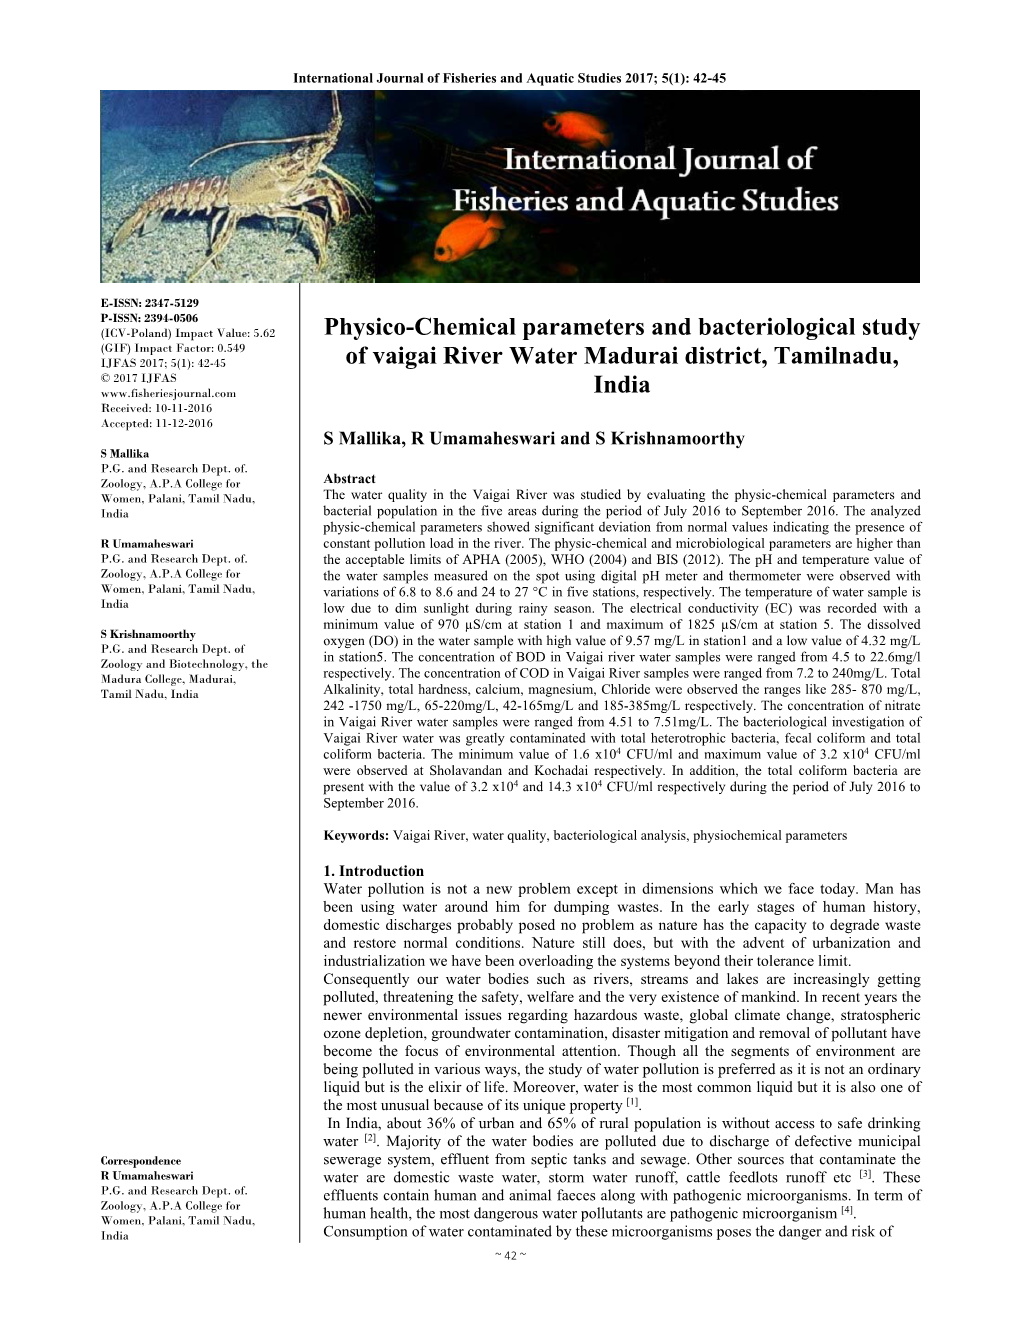 Physico-Chemical Parameters and Bacteriological Study of Vaigai River Water Madurai District, Tamilnadu, India